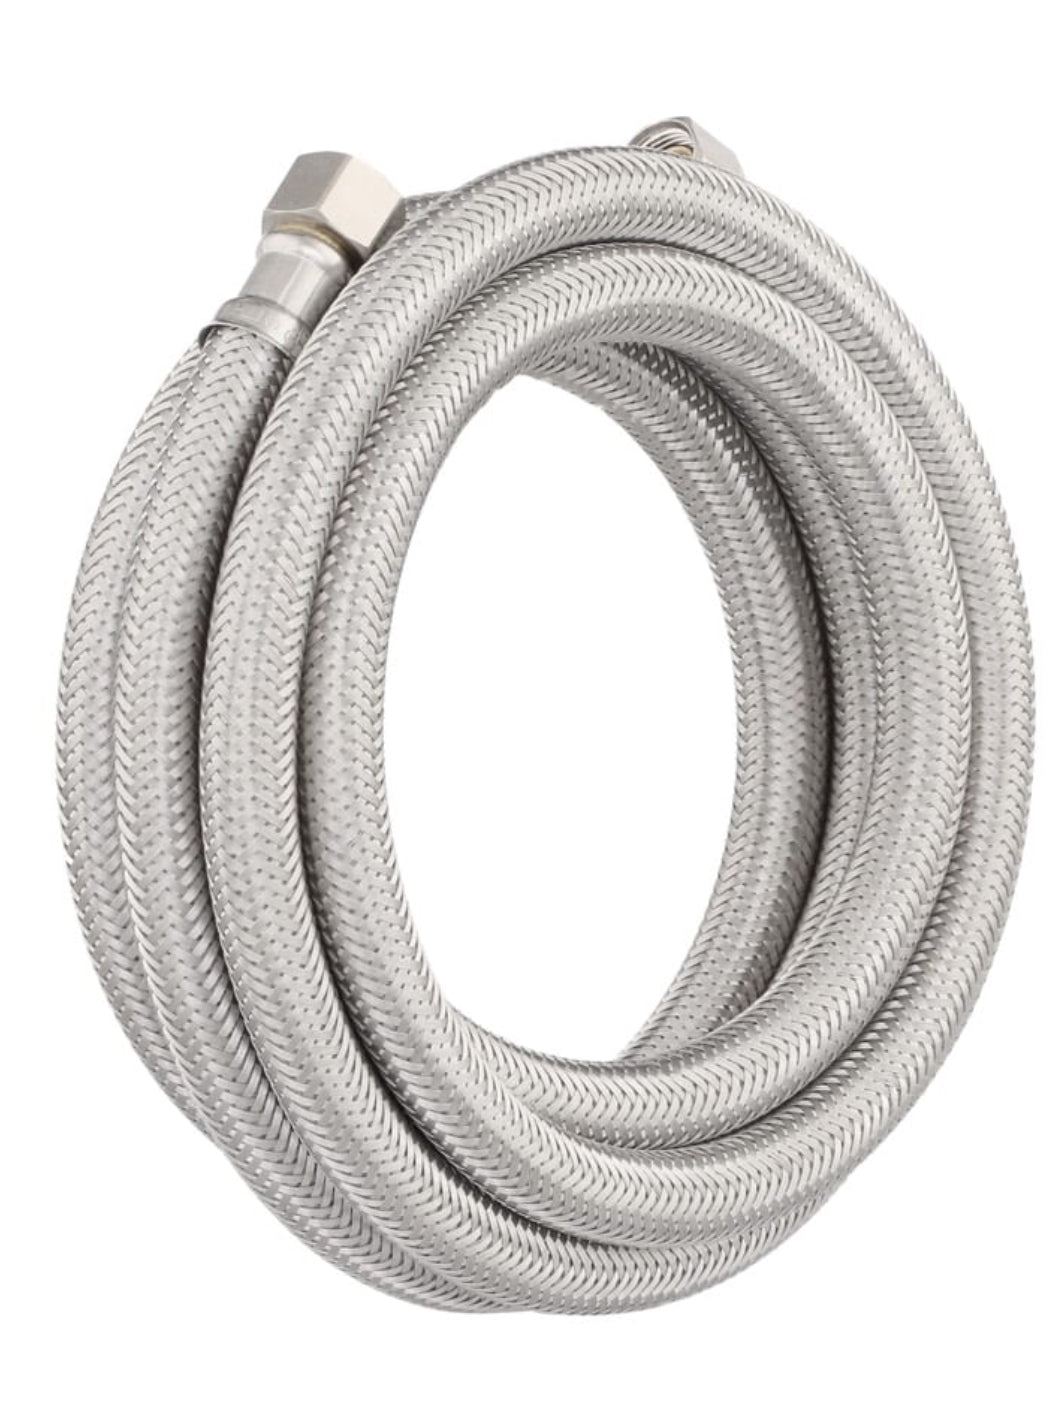 Everbilt 3/8 in. COMP x 3/8 in. COMP x 96 in. Universal Stainless Steel Dishwasher Connector